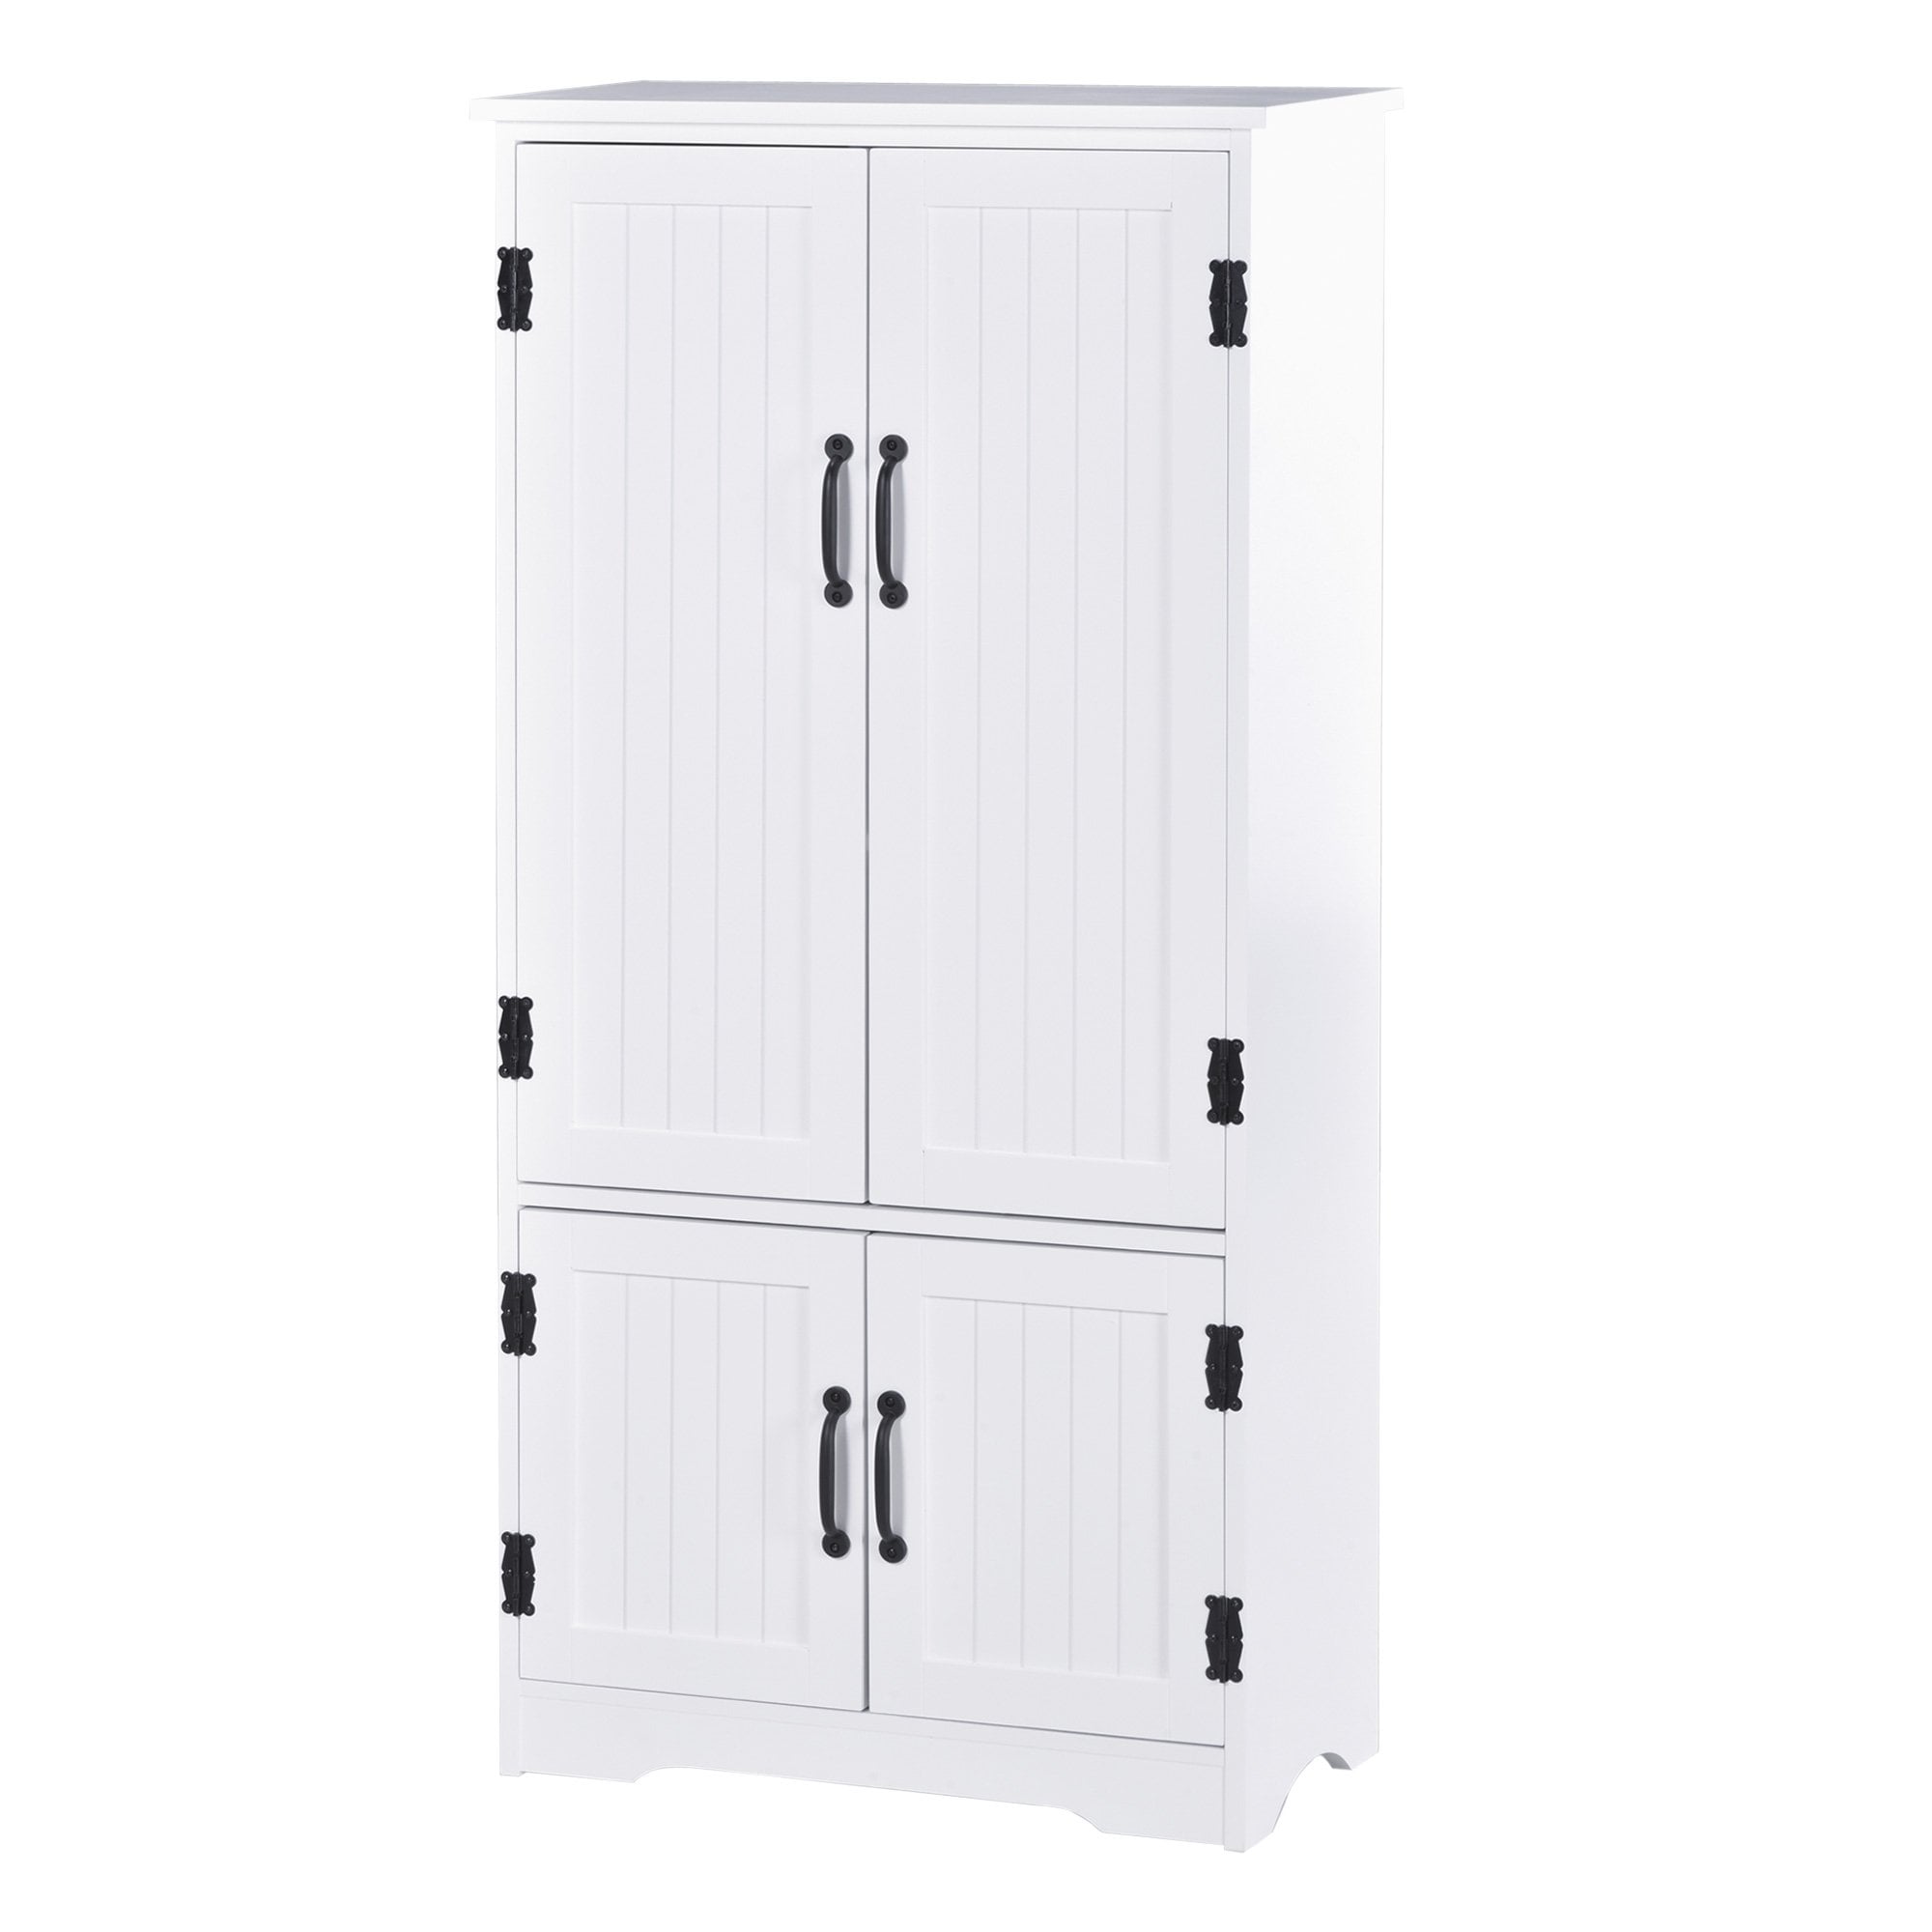 Accent Floor Storage Cabinet Kitchen Pantry with Adjustable Shelves and 2 Lower Doors - White w/Adjustable Shelves - Home Living  | TJ Hughes